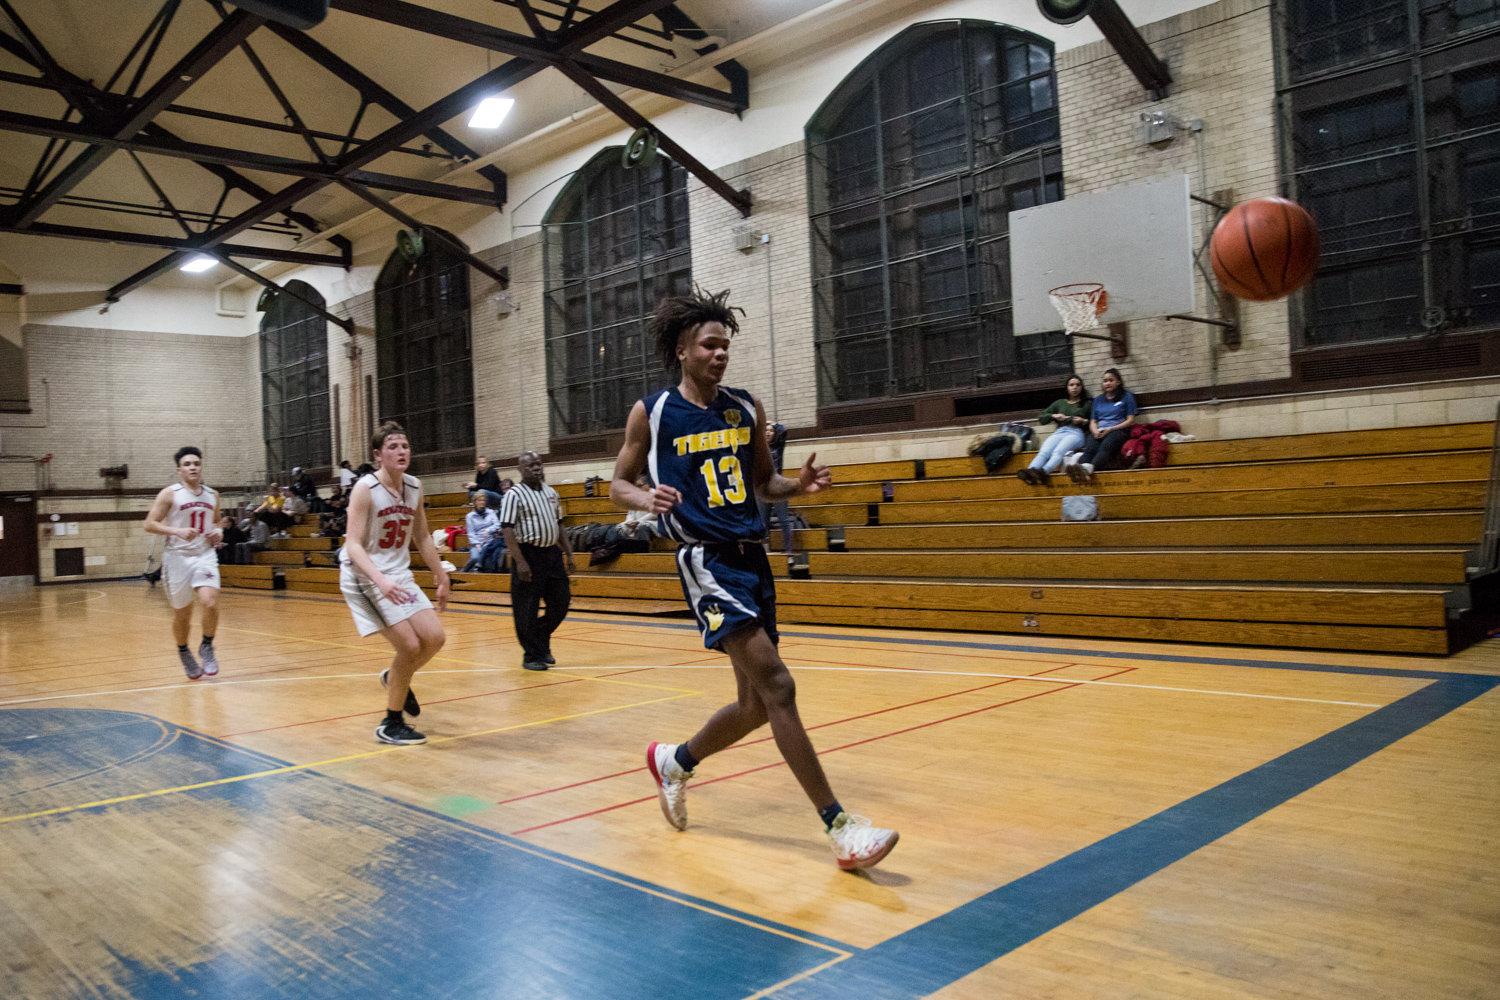 Riverdale/Kingsbridge Academy’s Kai Parris loses the ball out of bounds, but that was about the only thing not going his way as he scored 28 points in a convincing victory over American Studies.